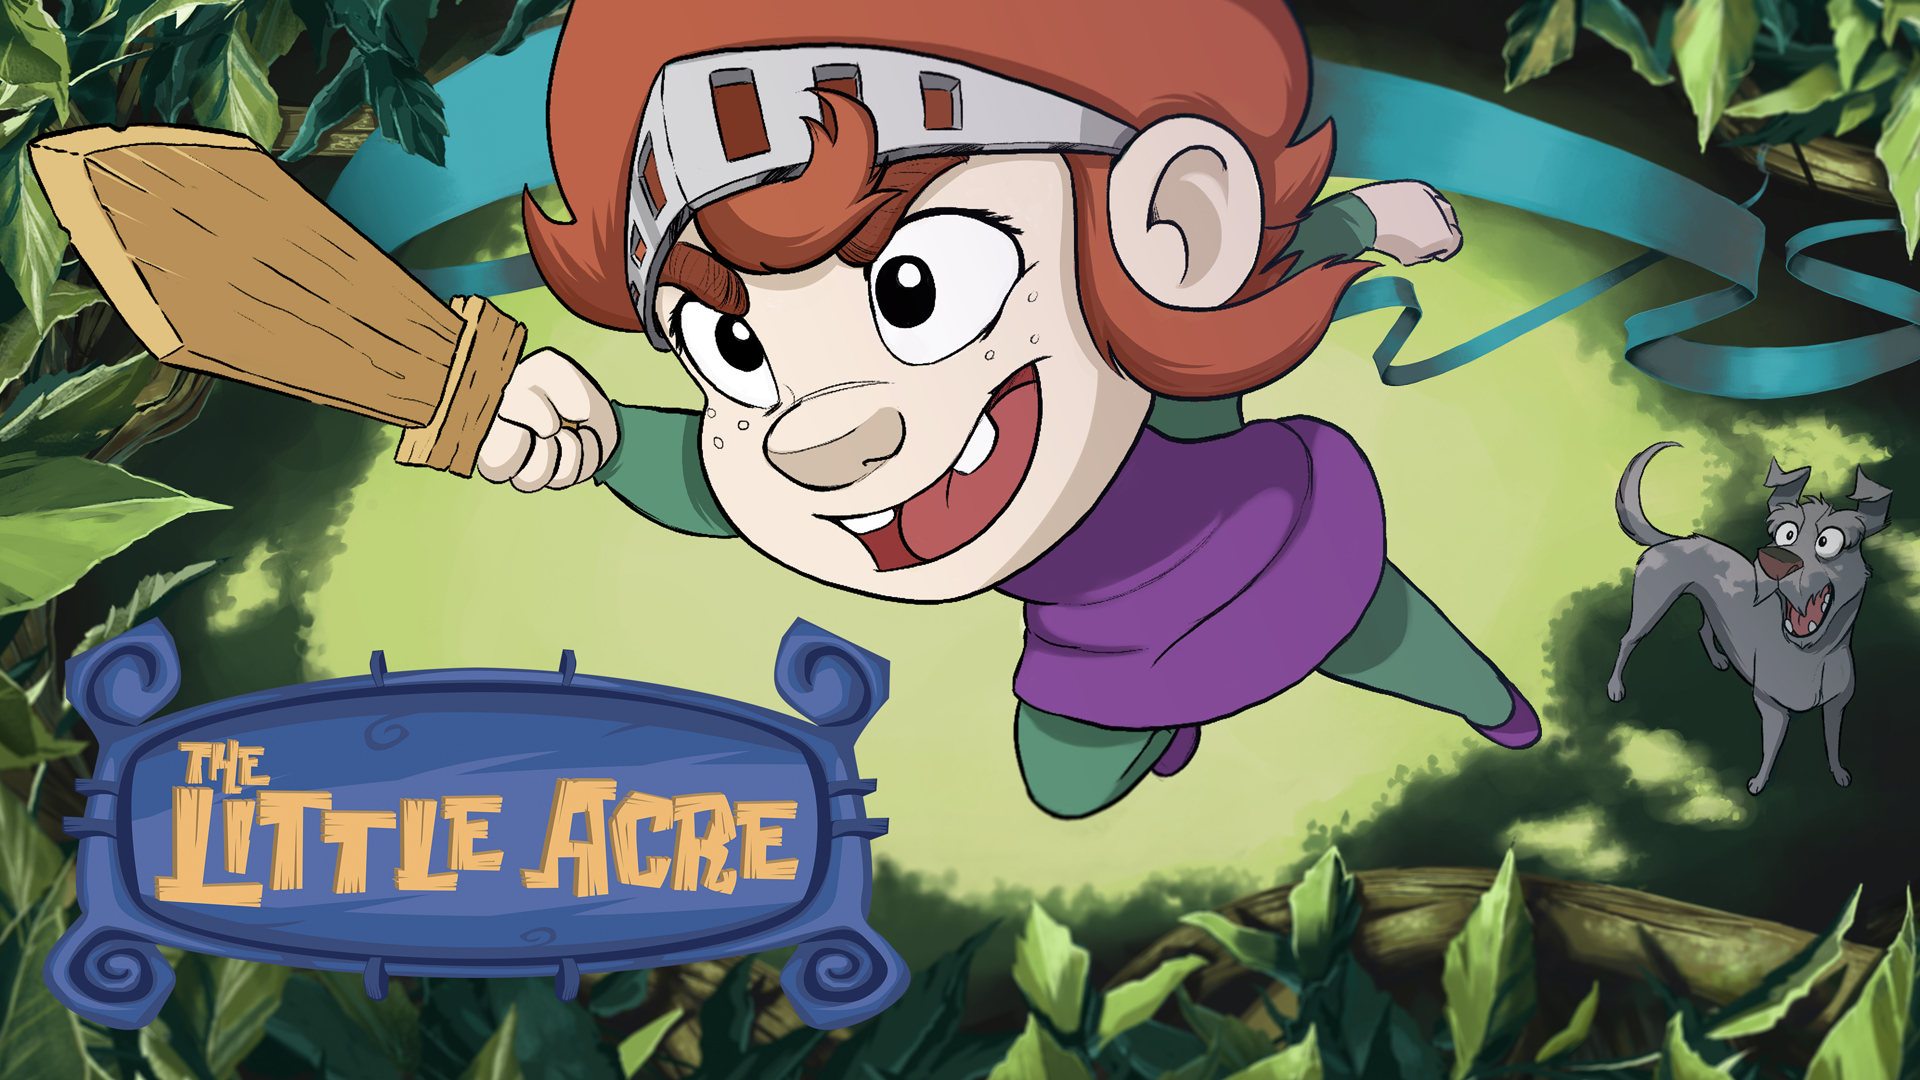 The Little Acre is a hand-drawn adventure game from the creator of Broken  Sword